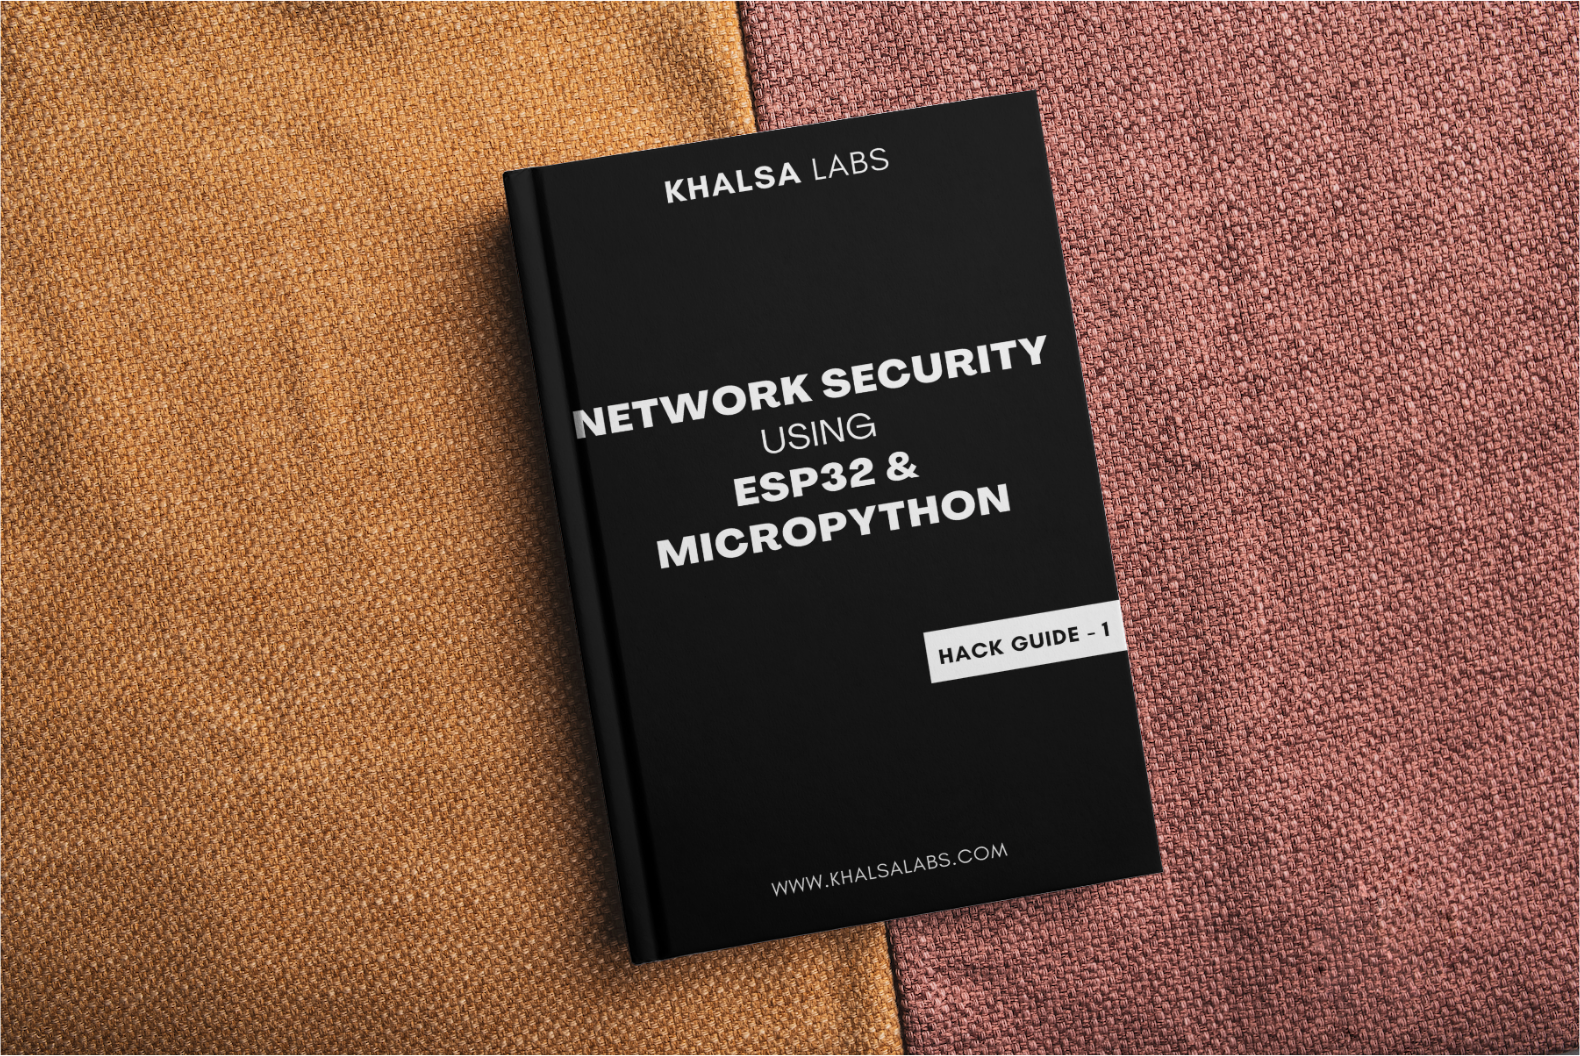 Download Guide - ESP32 and Micropython For Network Security